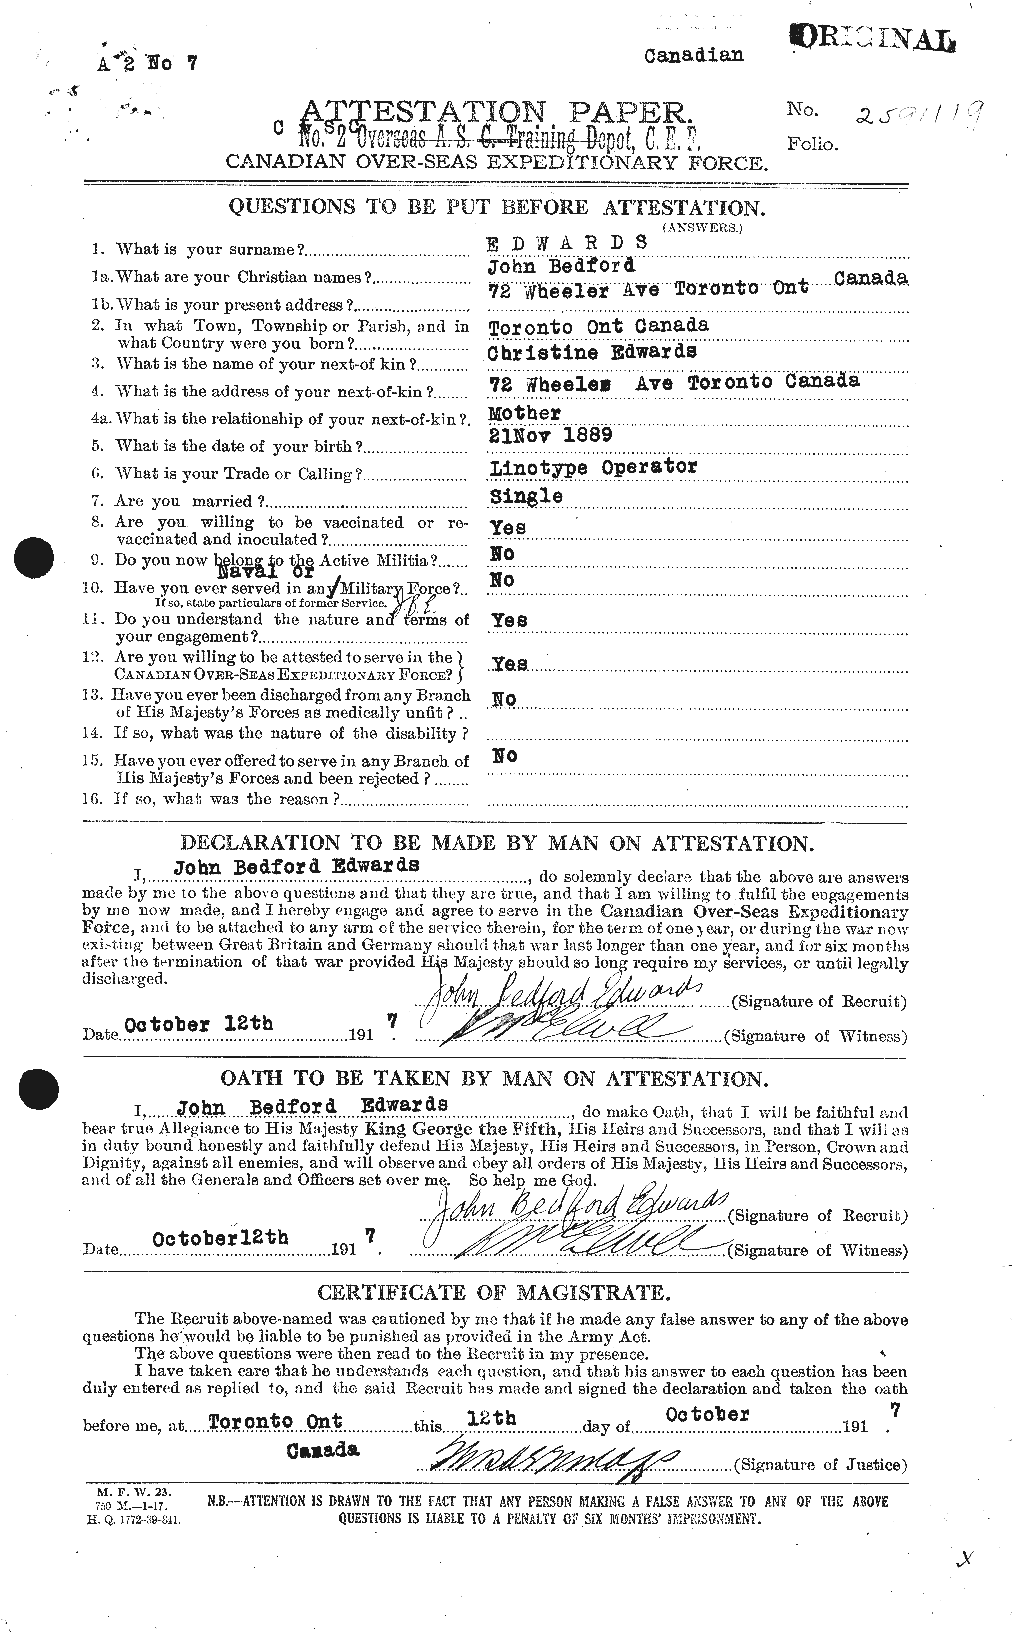 Personnel Records of the First World War - CEF 310121a